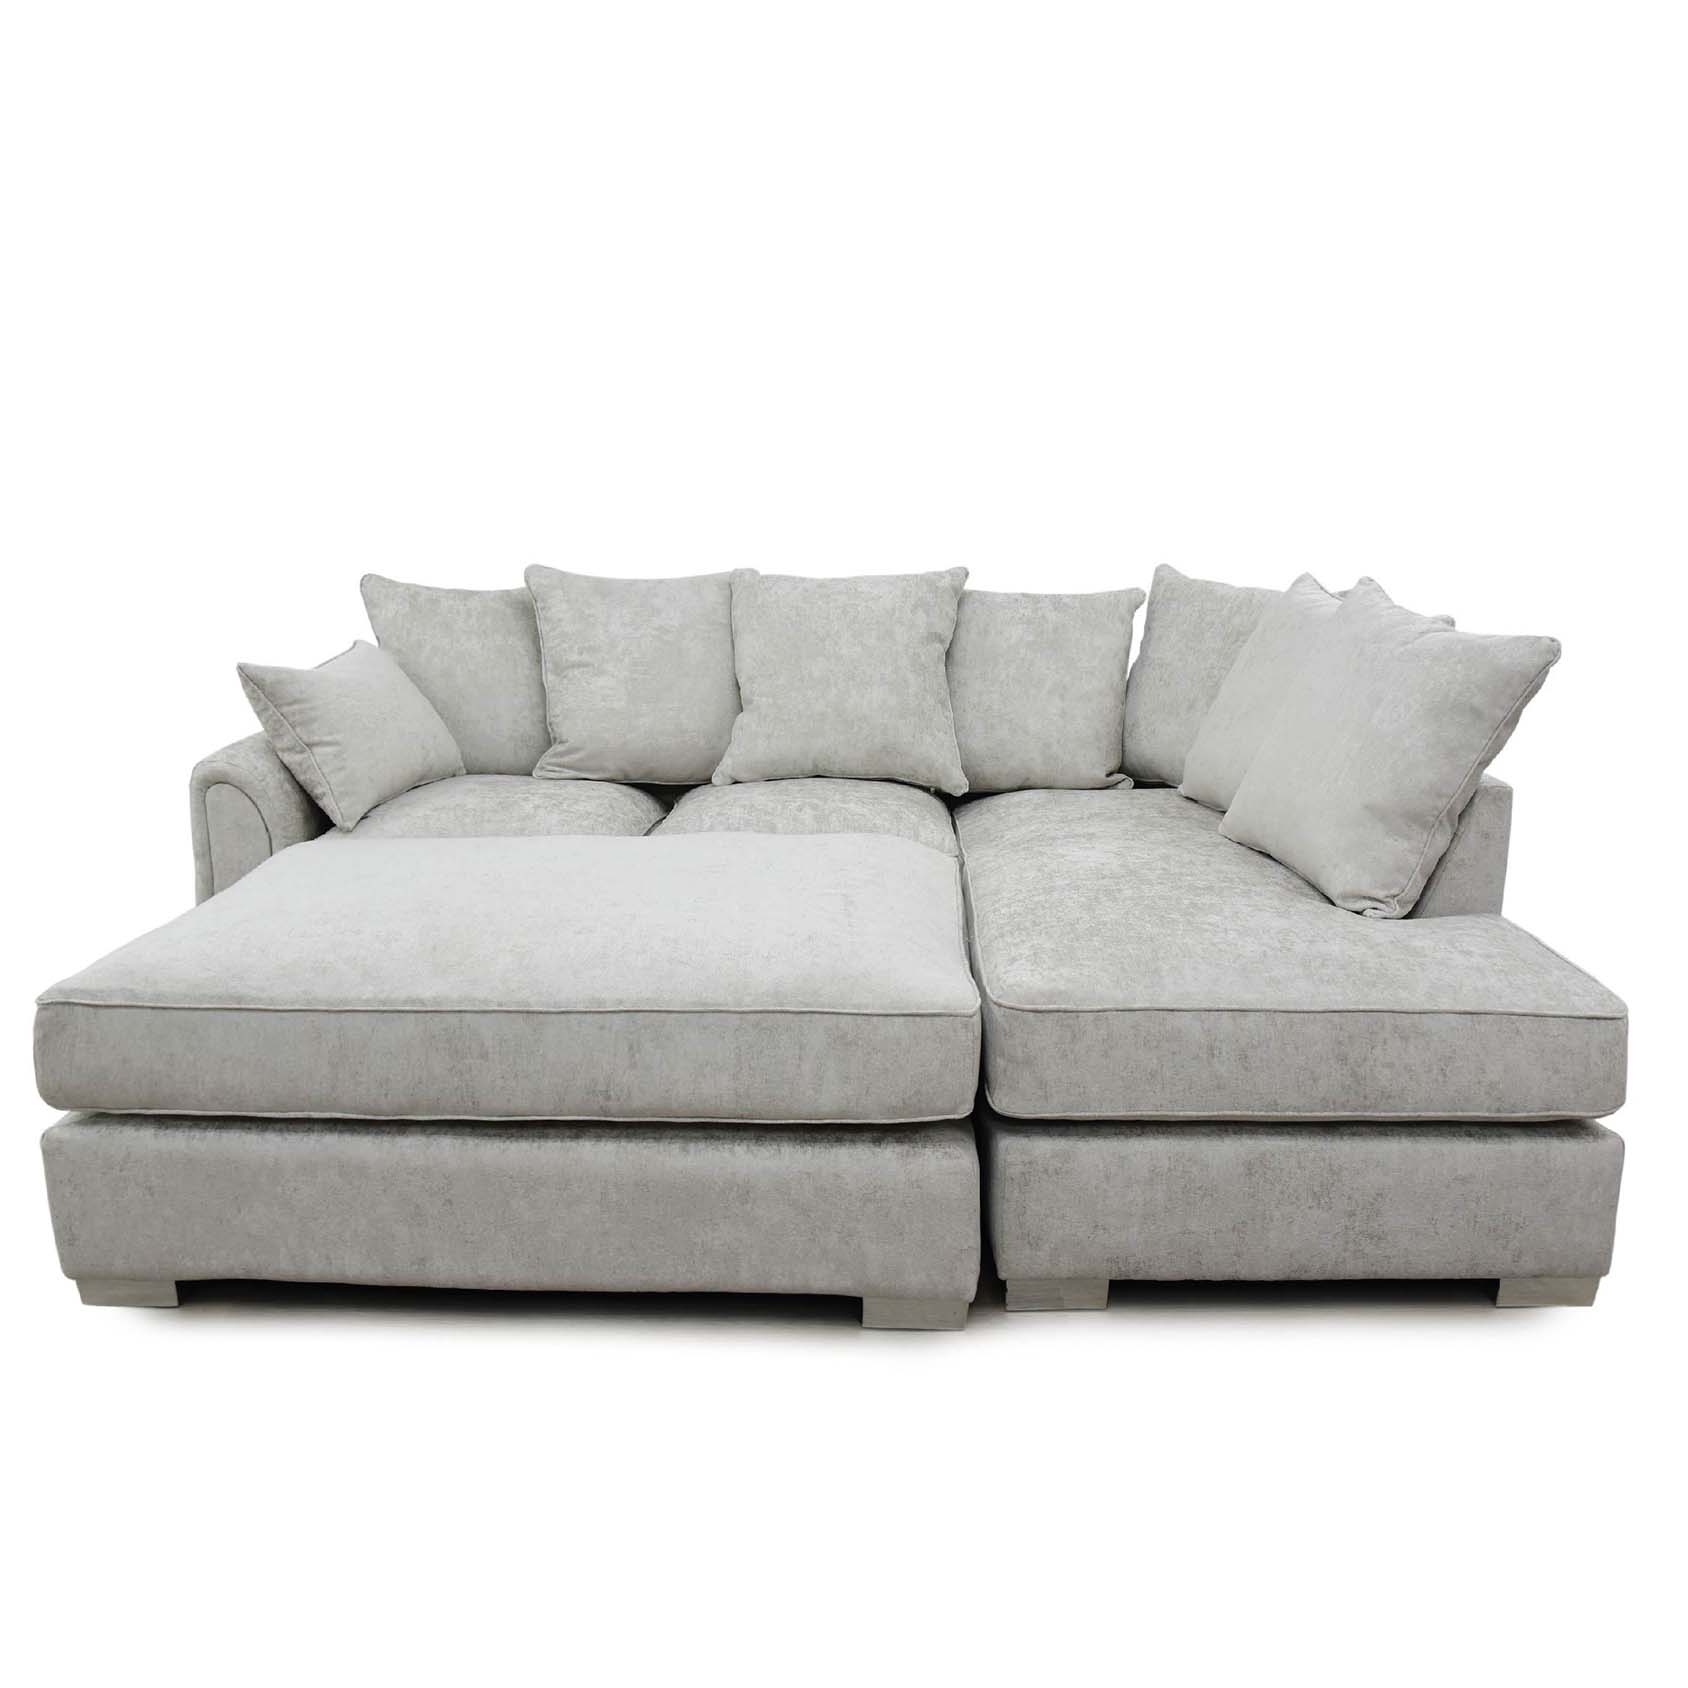 Battersea Sofa with Right Hand Facing Chaise with Footstool as Daybed